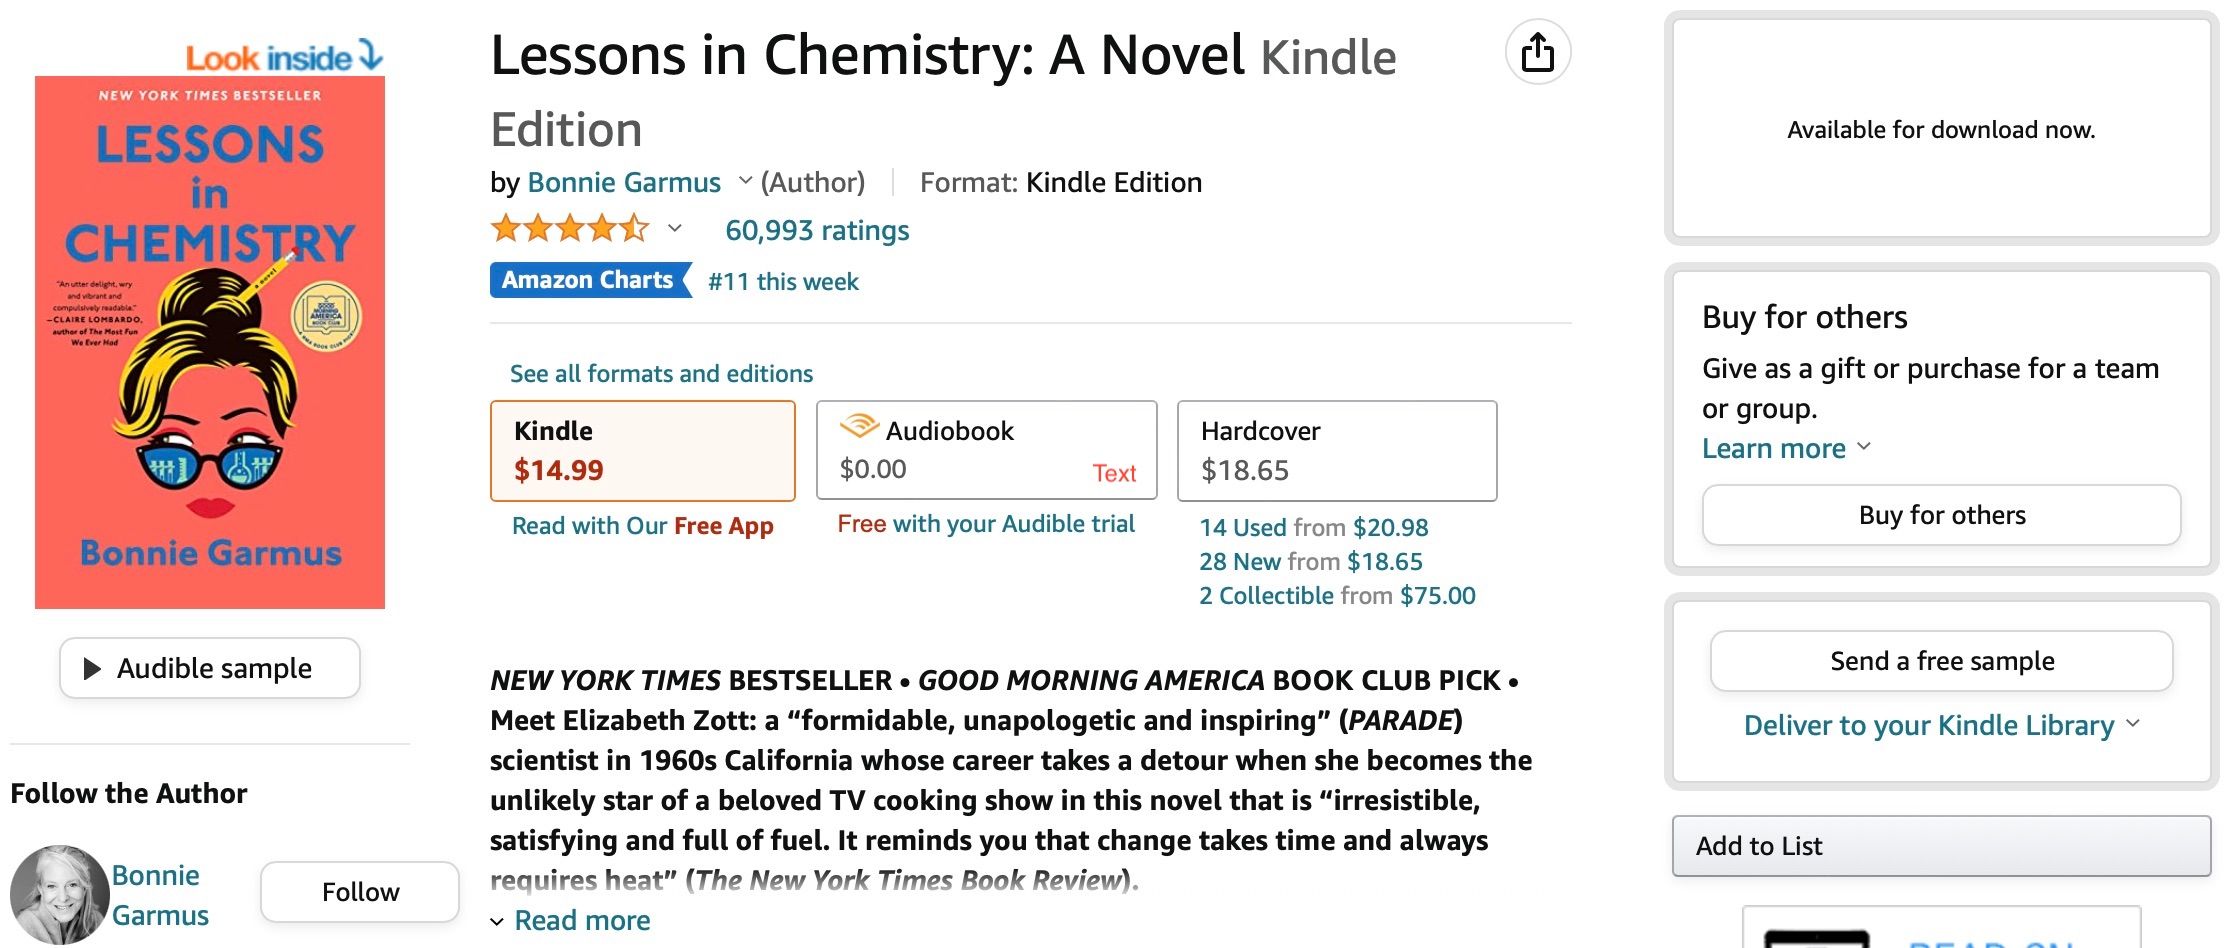 Screenshot of Amazon Kindle store showing buy for others option on a sample title